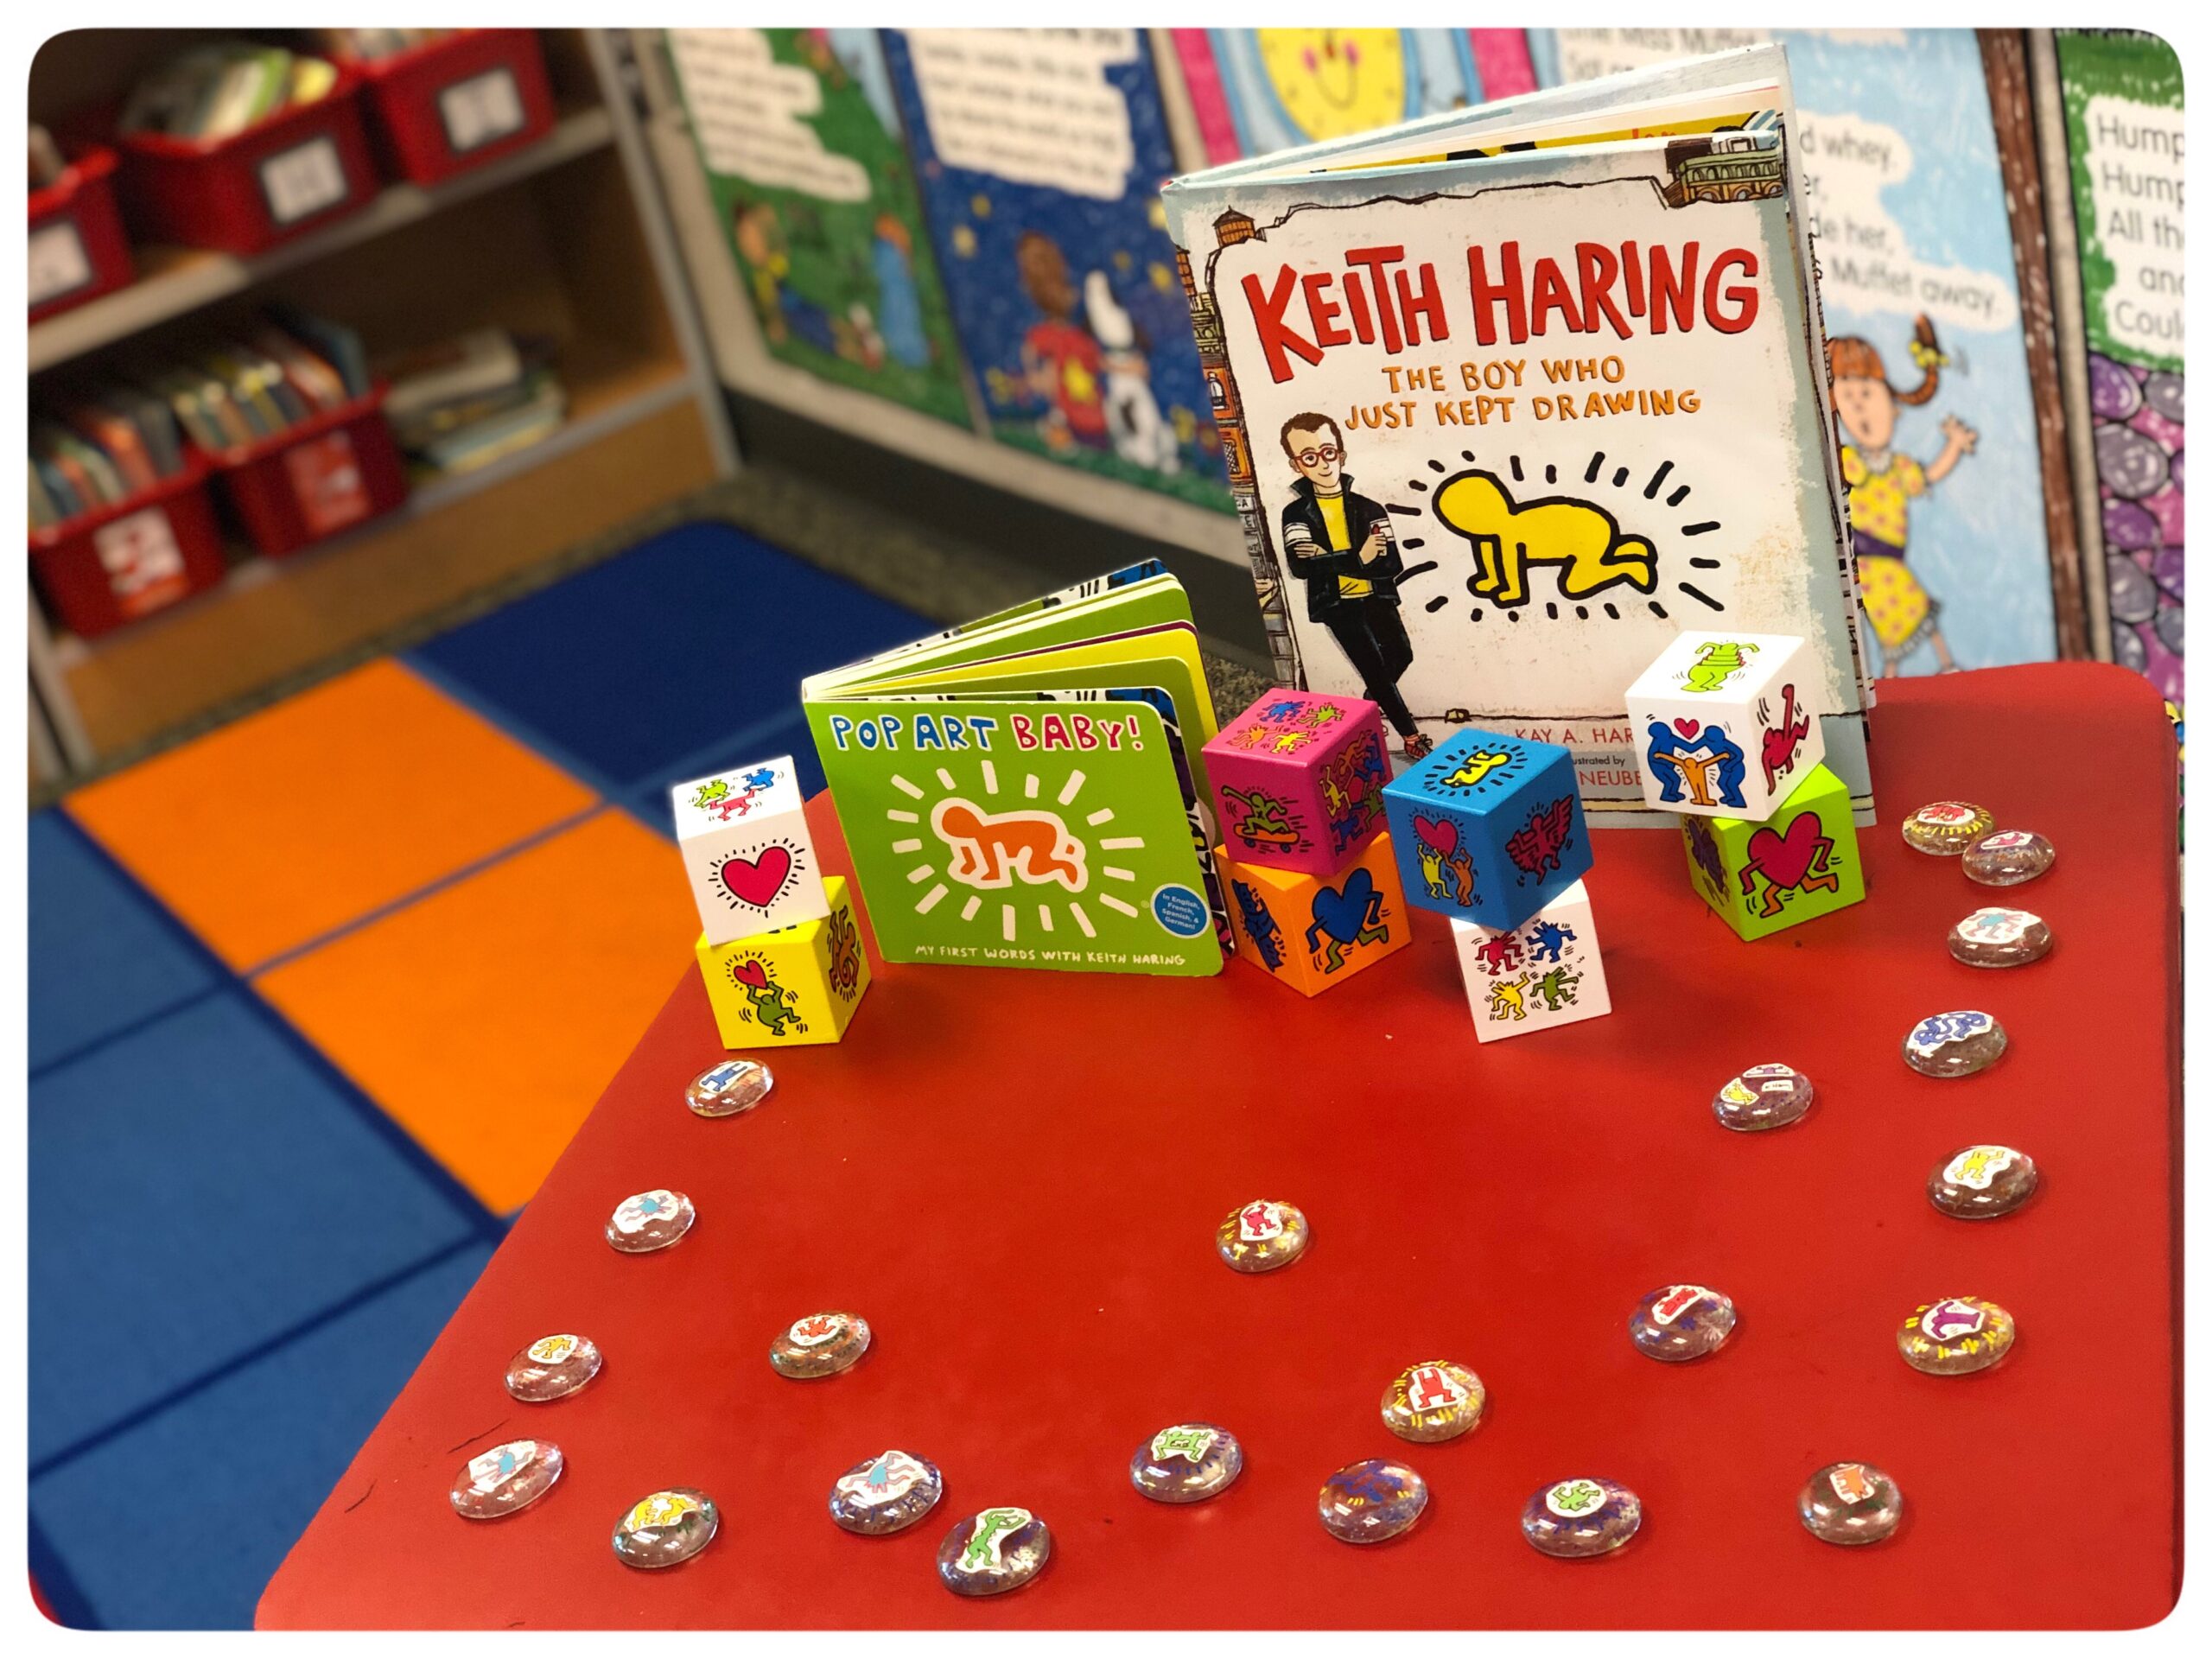 Keith Haring, a famous artist, is primarily known for solid, bold lines with vibrant colors.  His vibrant artwork tells of friendship, fun, and acceptance. Today we're creating interactive ways to think about Pop Art while learning about Keith Haring